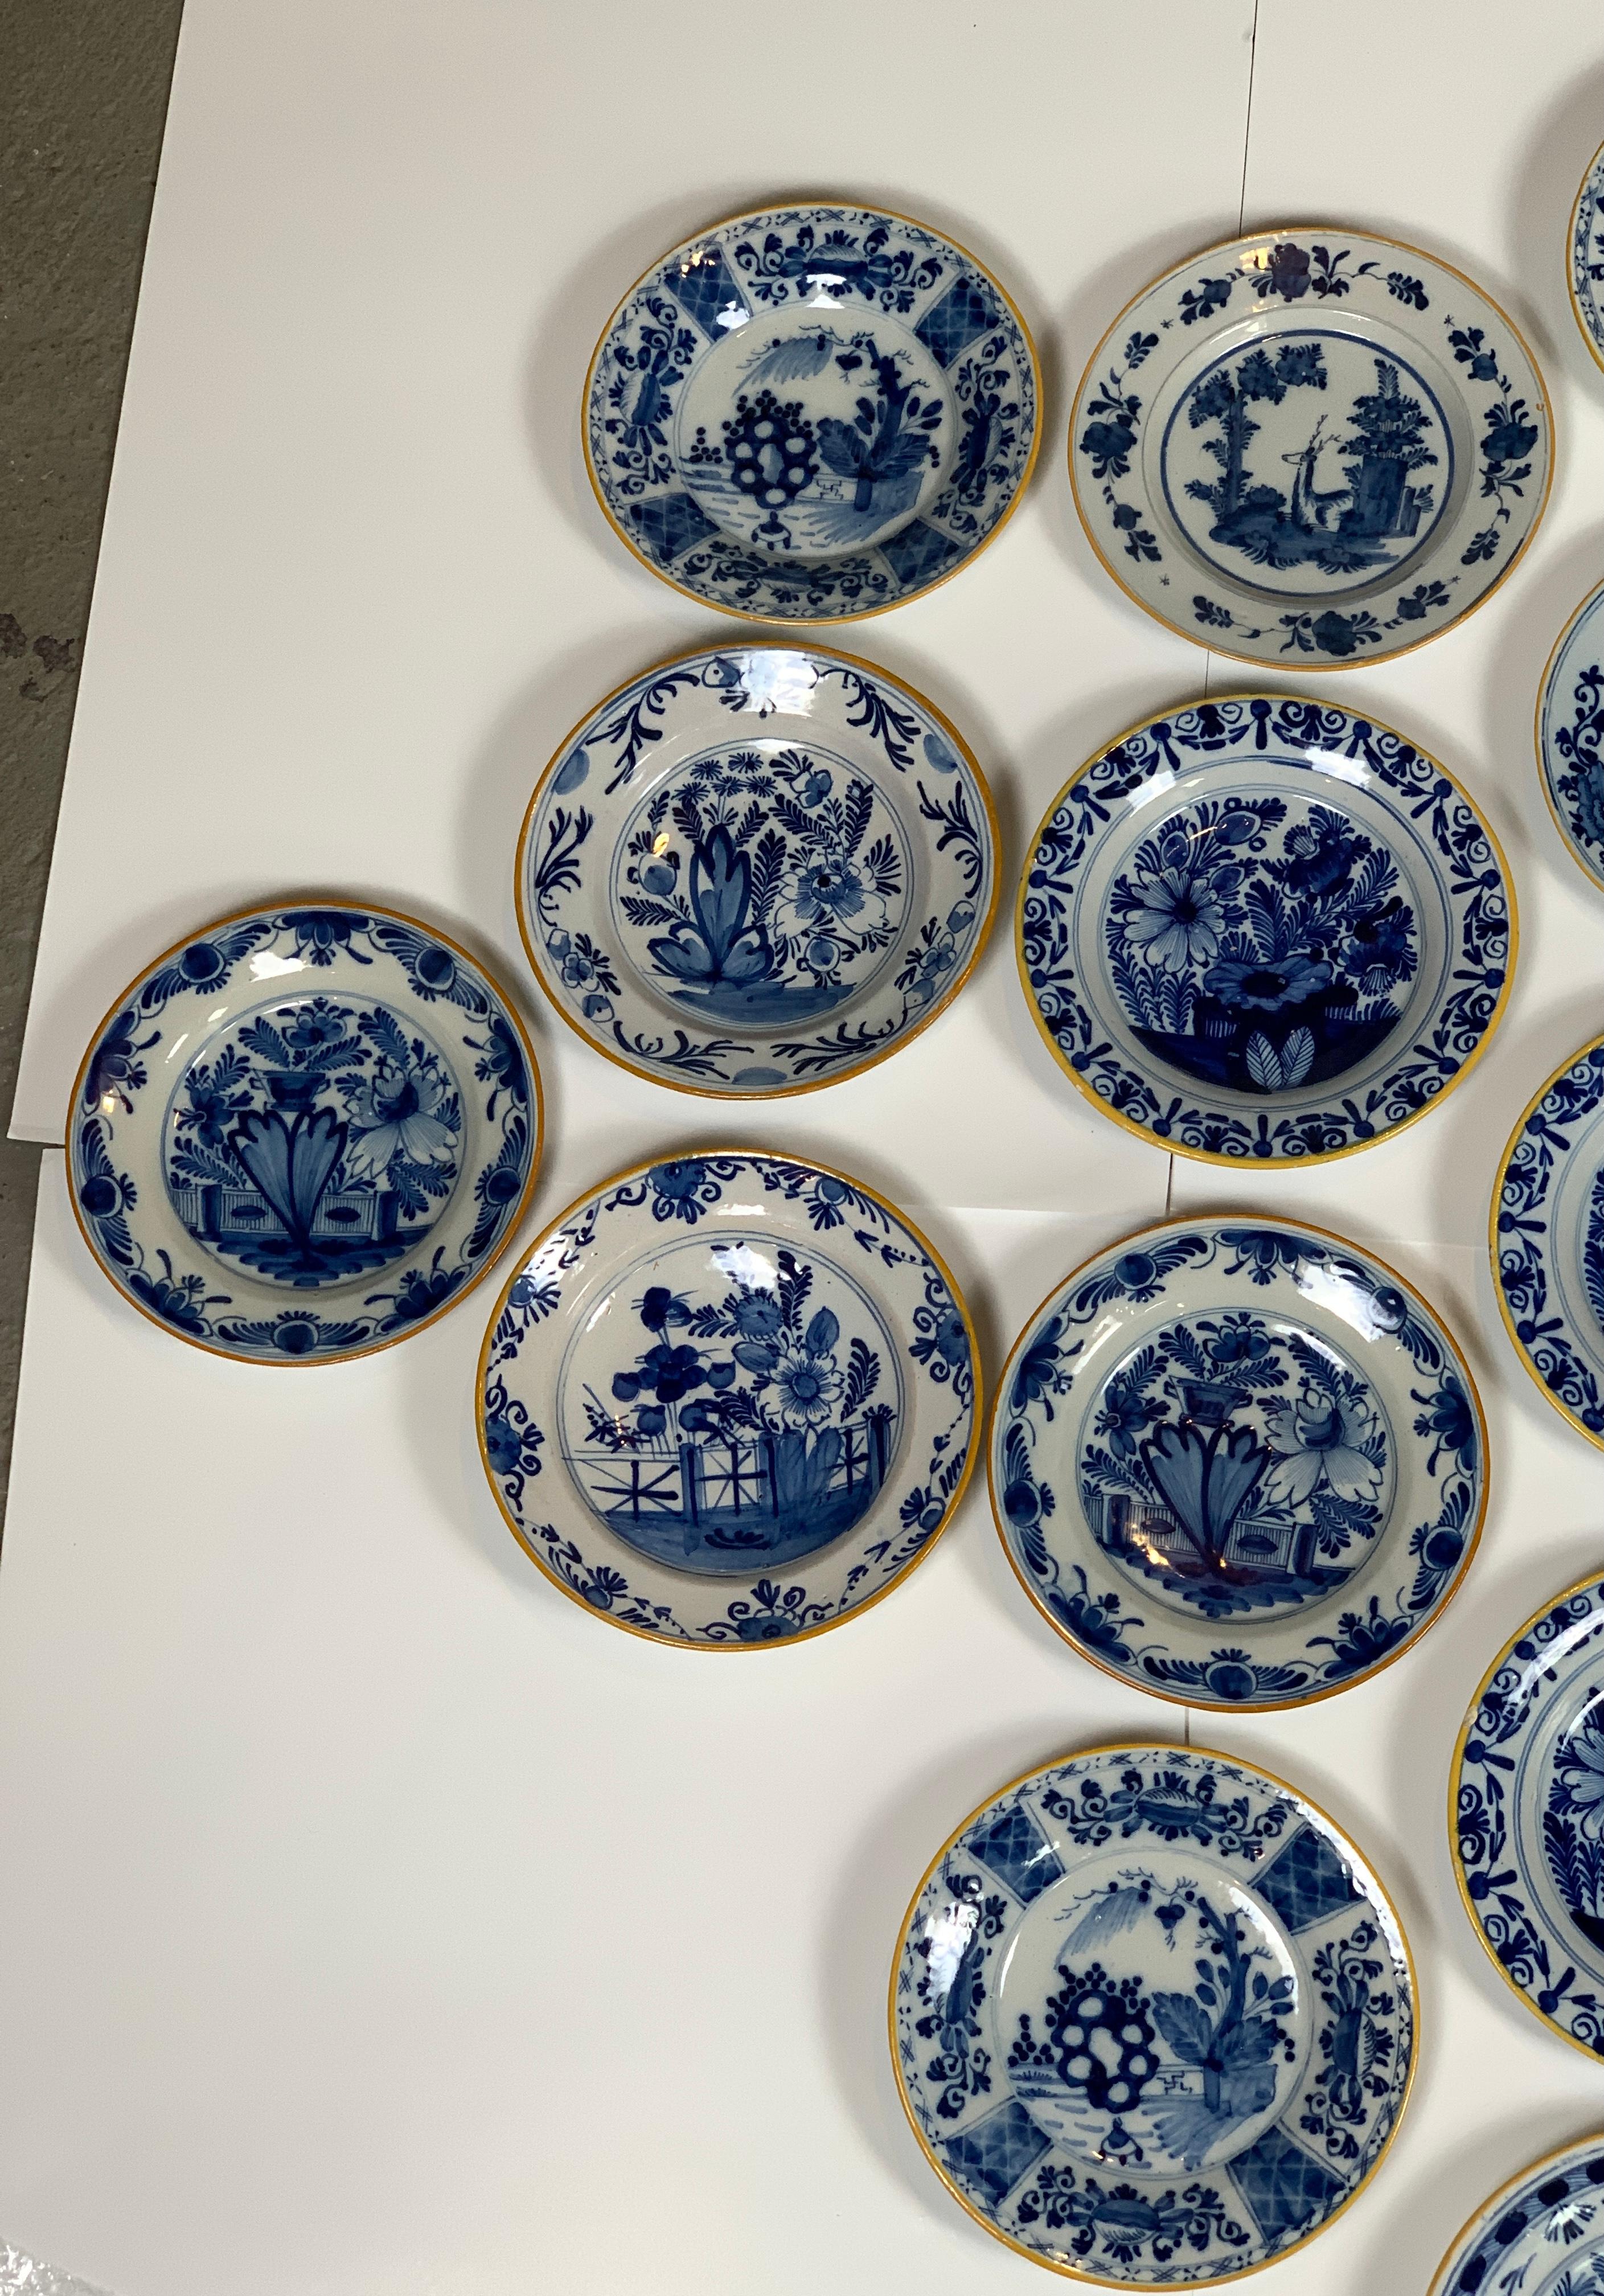 Twenty-one blue and white Dutch Delft dishes hand-painted in the 18th and very early 19th century showing a variety of traditional scenes, including a deer in the forest, floral bouquets, and gardens overflowing with peonies and other flowers (see